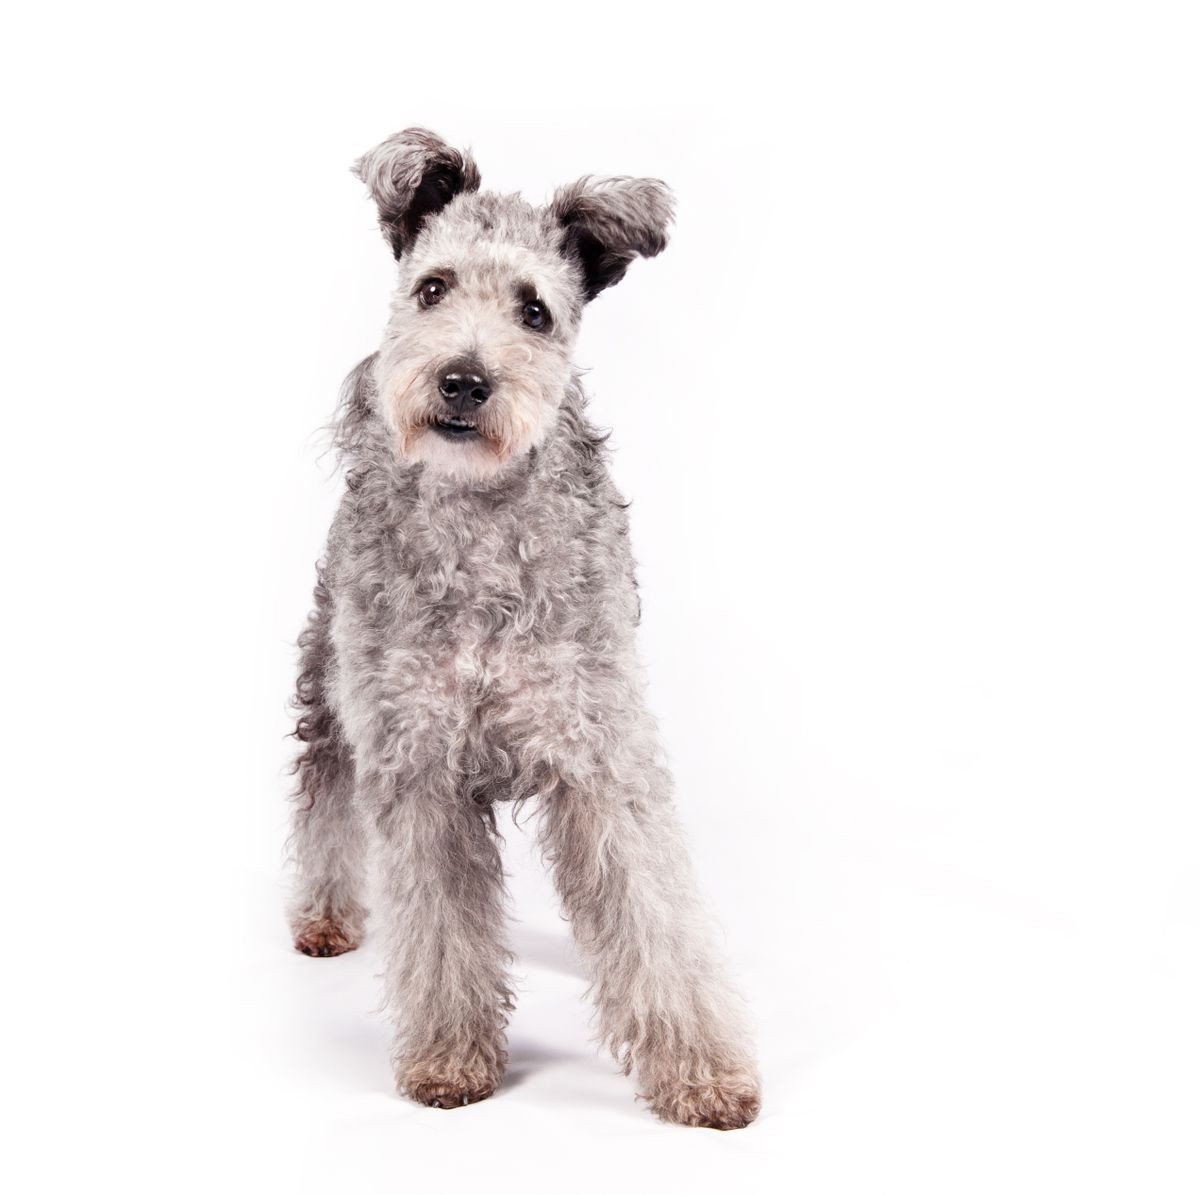 In this undated photo provided by the American Kennel Club, a pumi is shown. The high-energy Hungarian herding dog is the latest new breed headed to the Westminster Kennel Club and many other U.S. dog shows.  (Thomas Pitera/The American Kennel Club via AP)